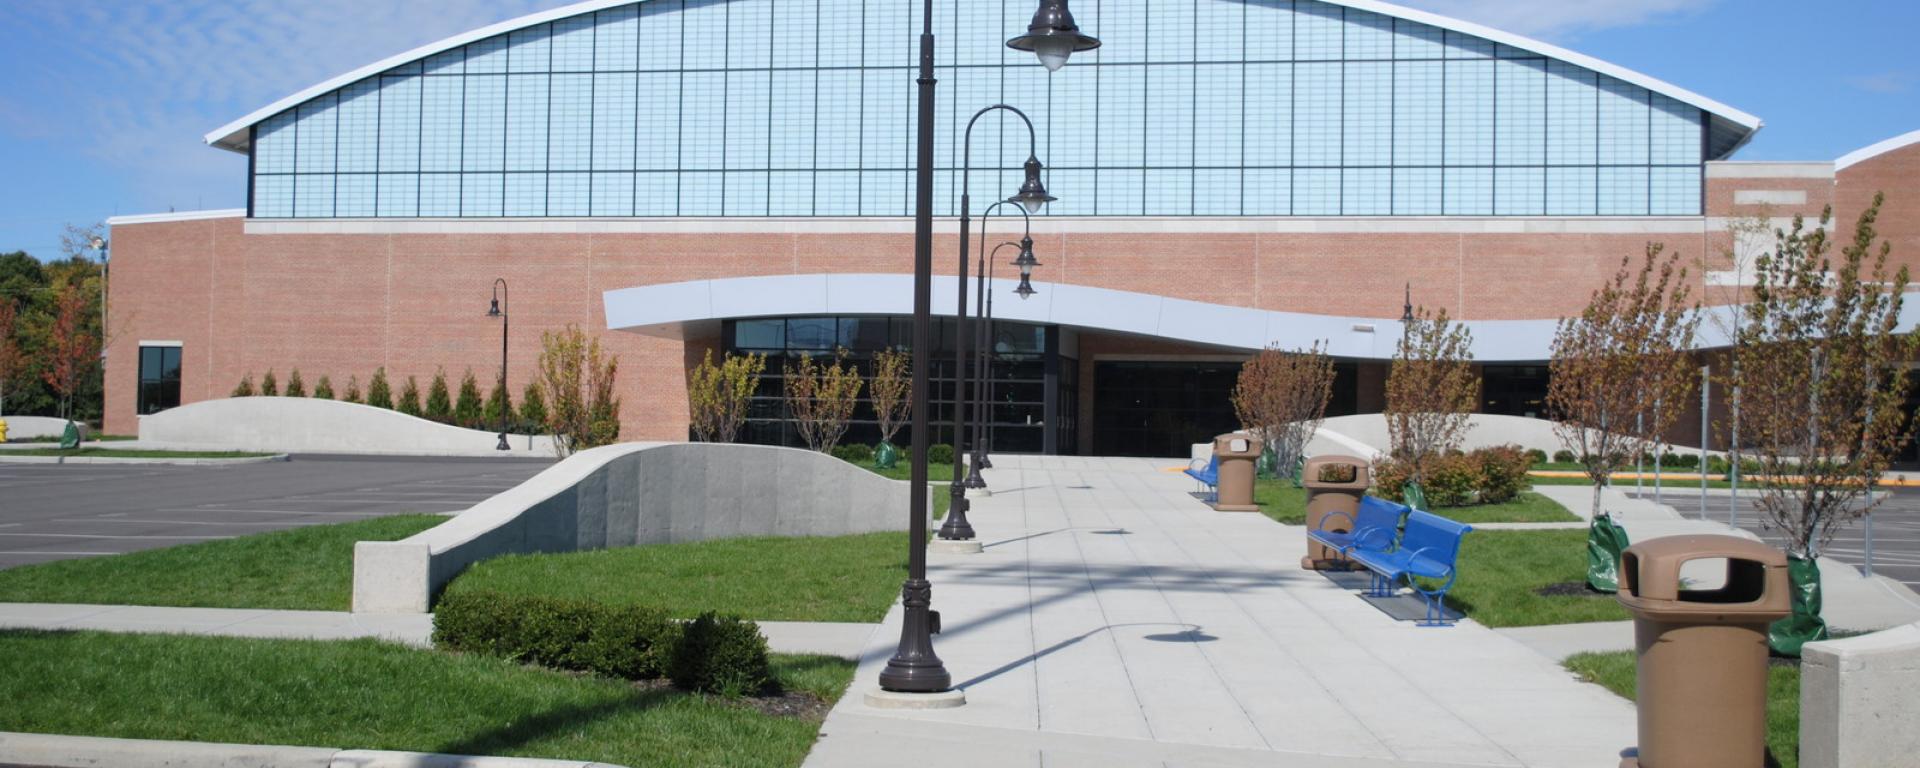 walkway and front entrance of school